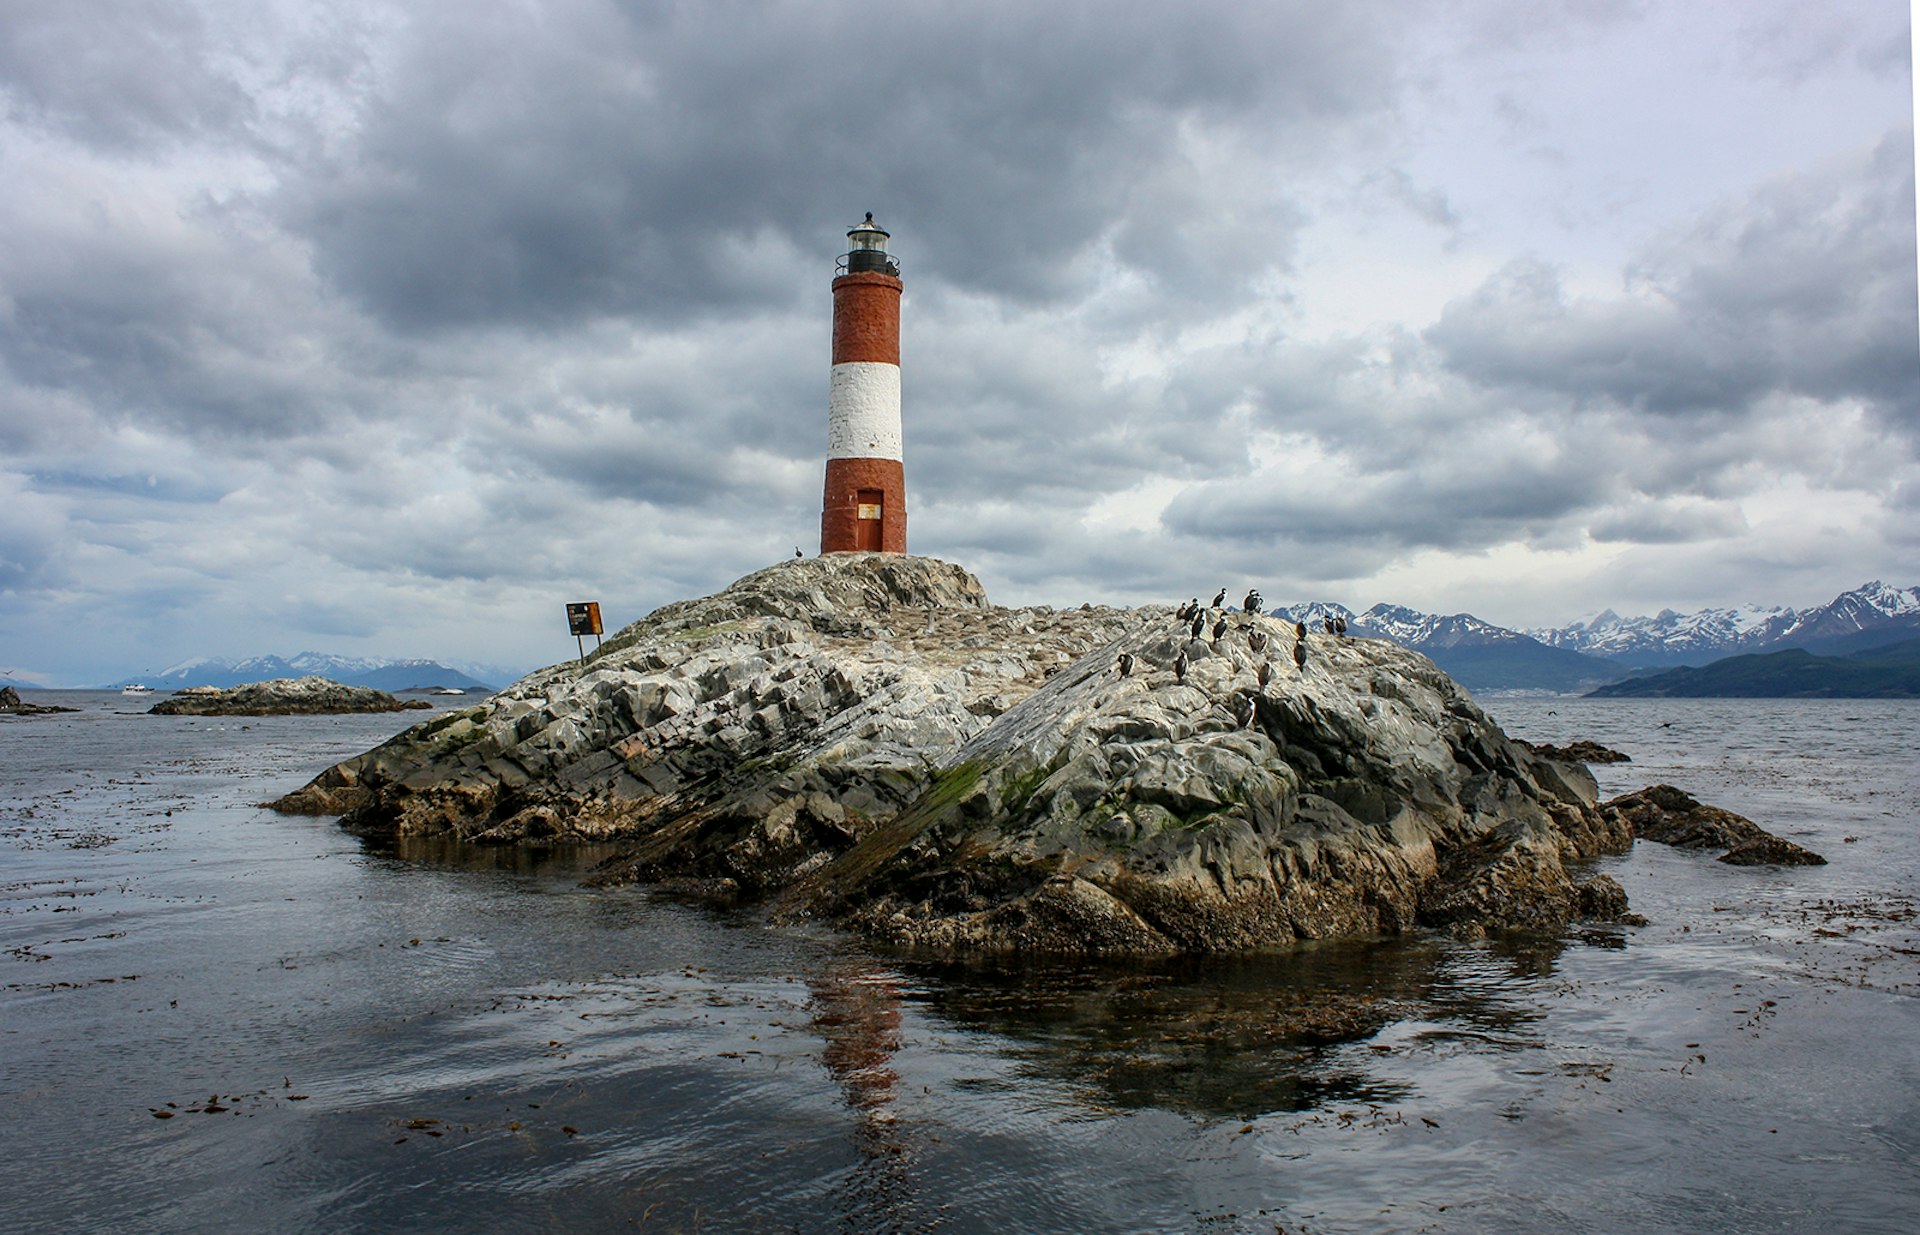 A red and white lighthouse on a rock, with penguins standing in the foreground and mountains framing the scene © Bridget Gleeson / Lonely Planet